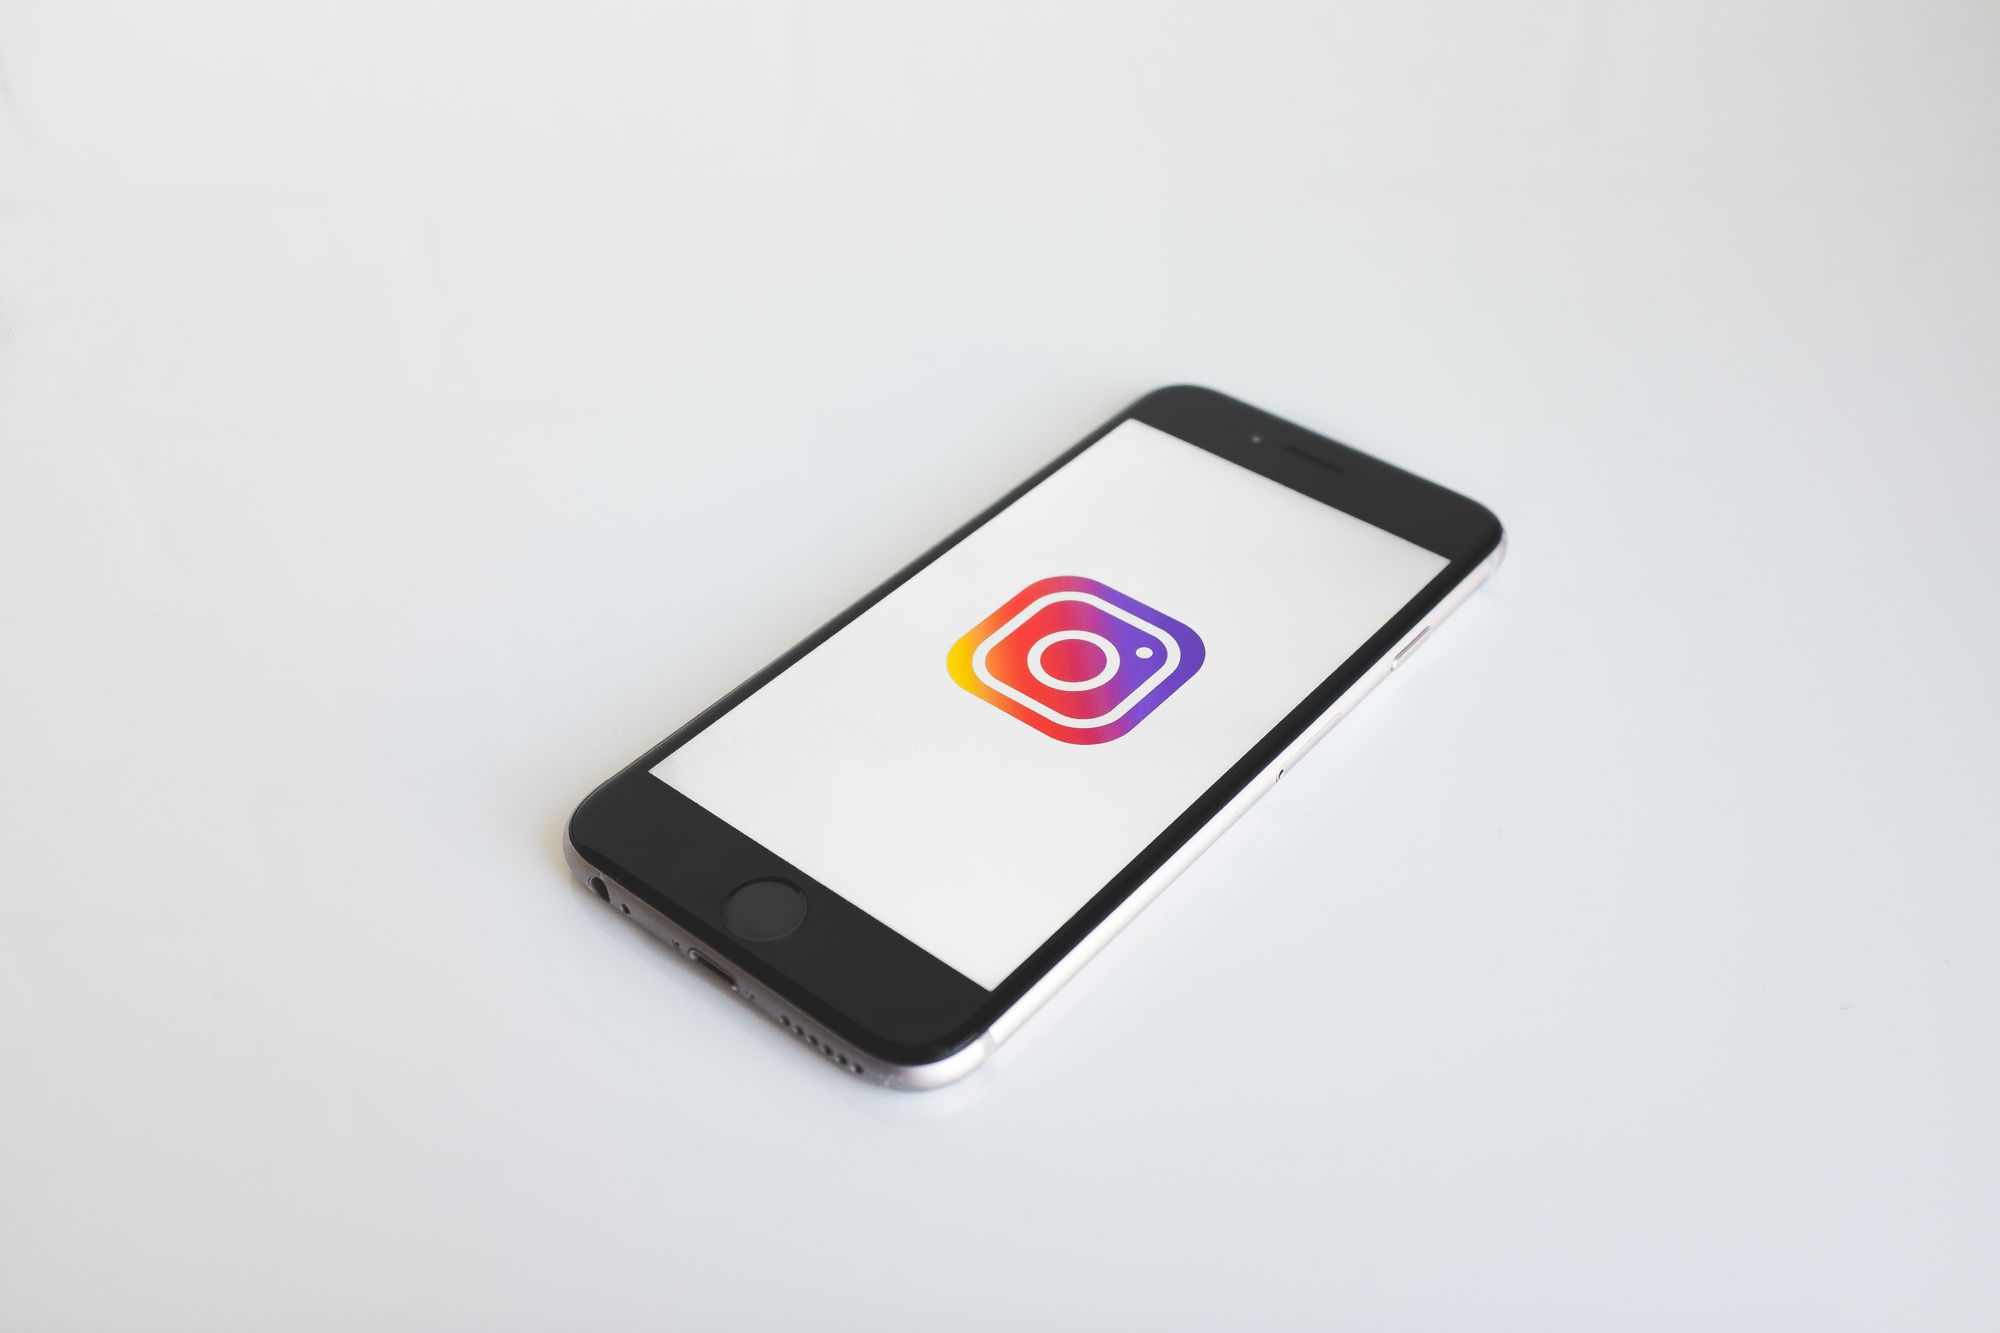 How to Use Instagram: A 101 Guide